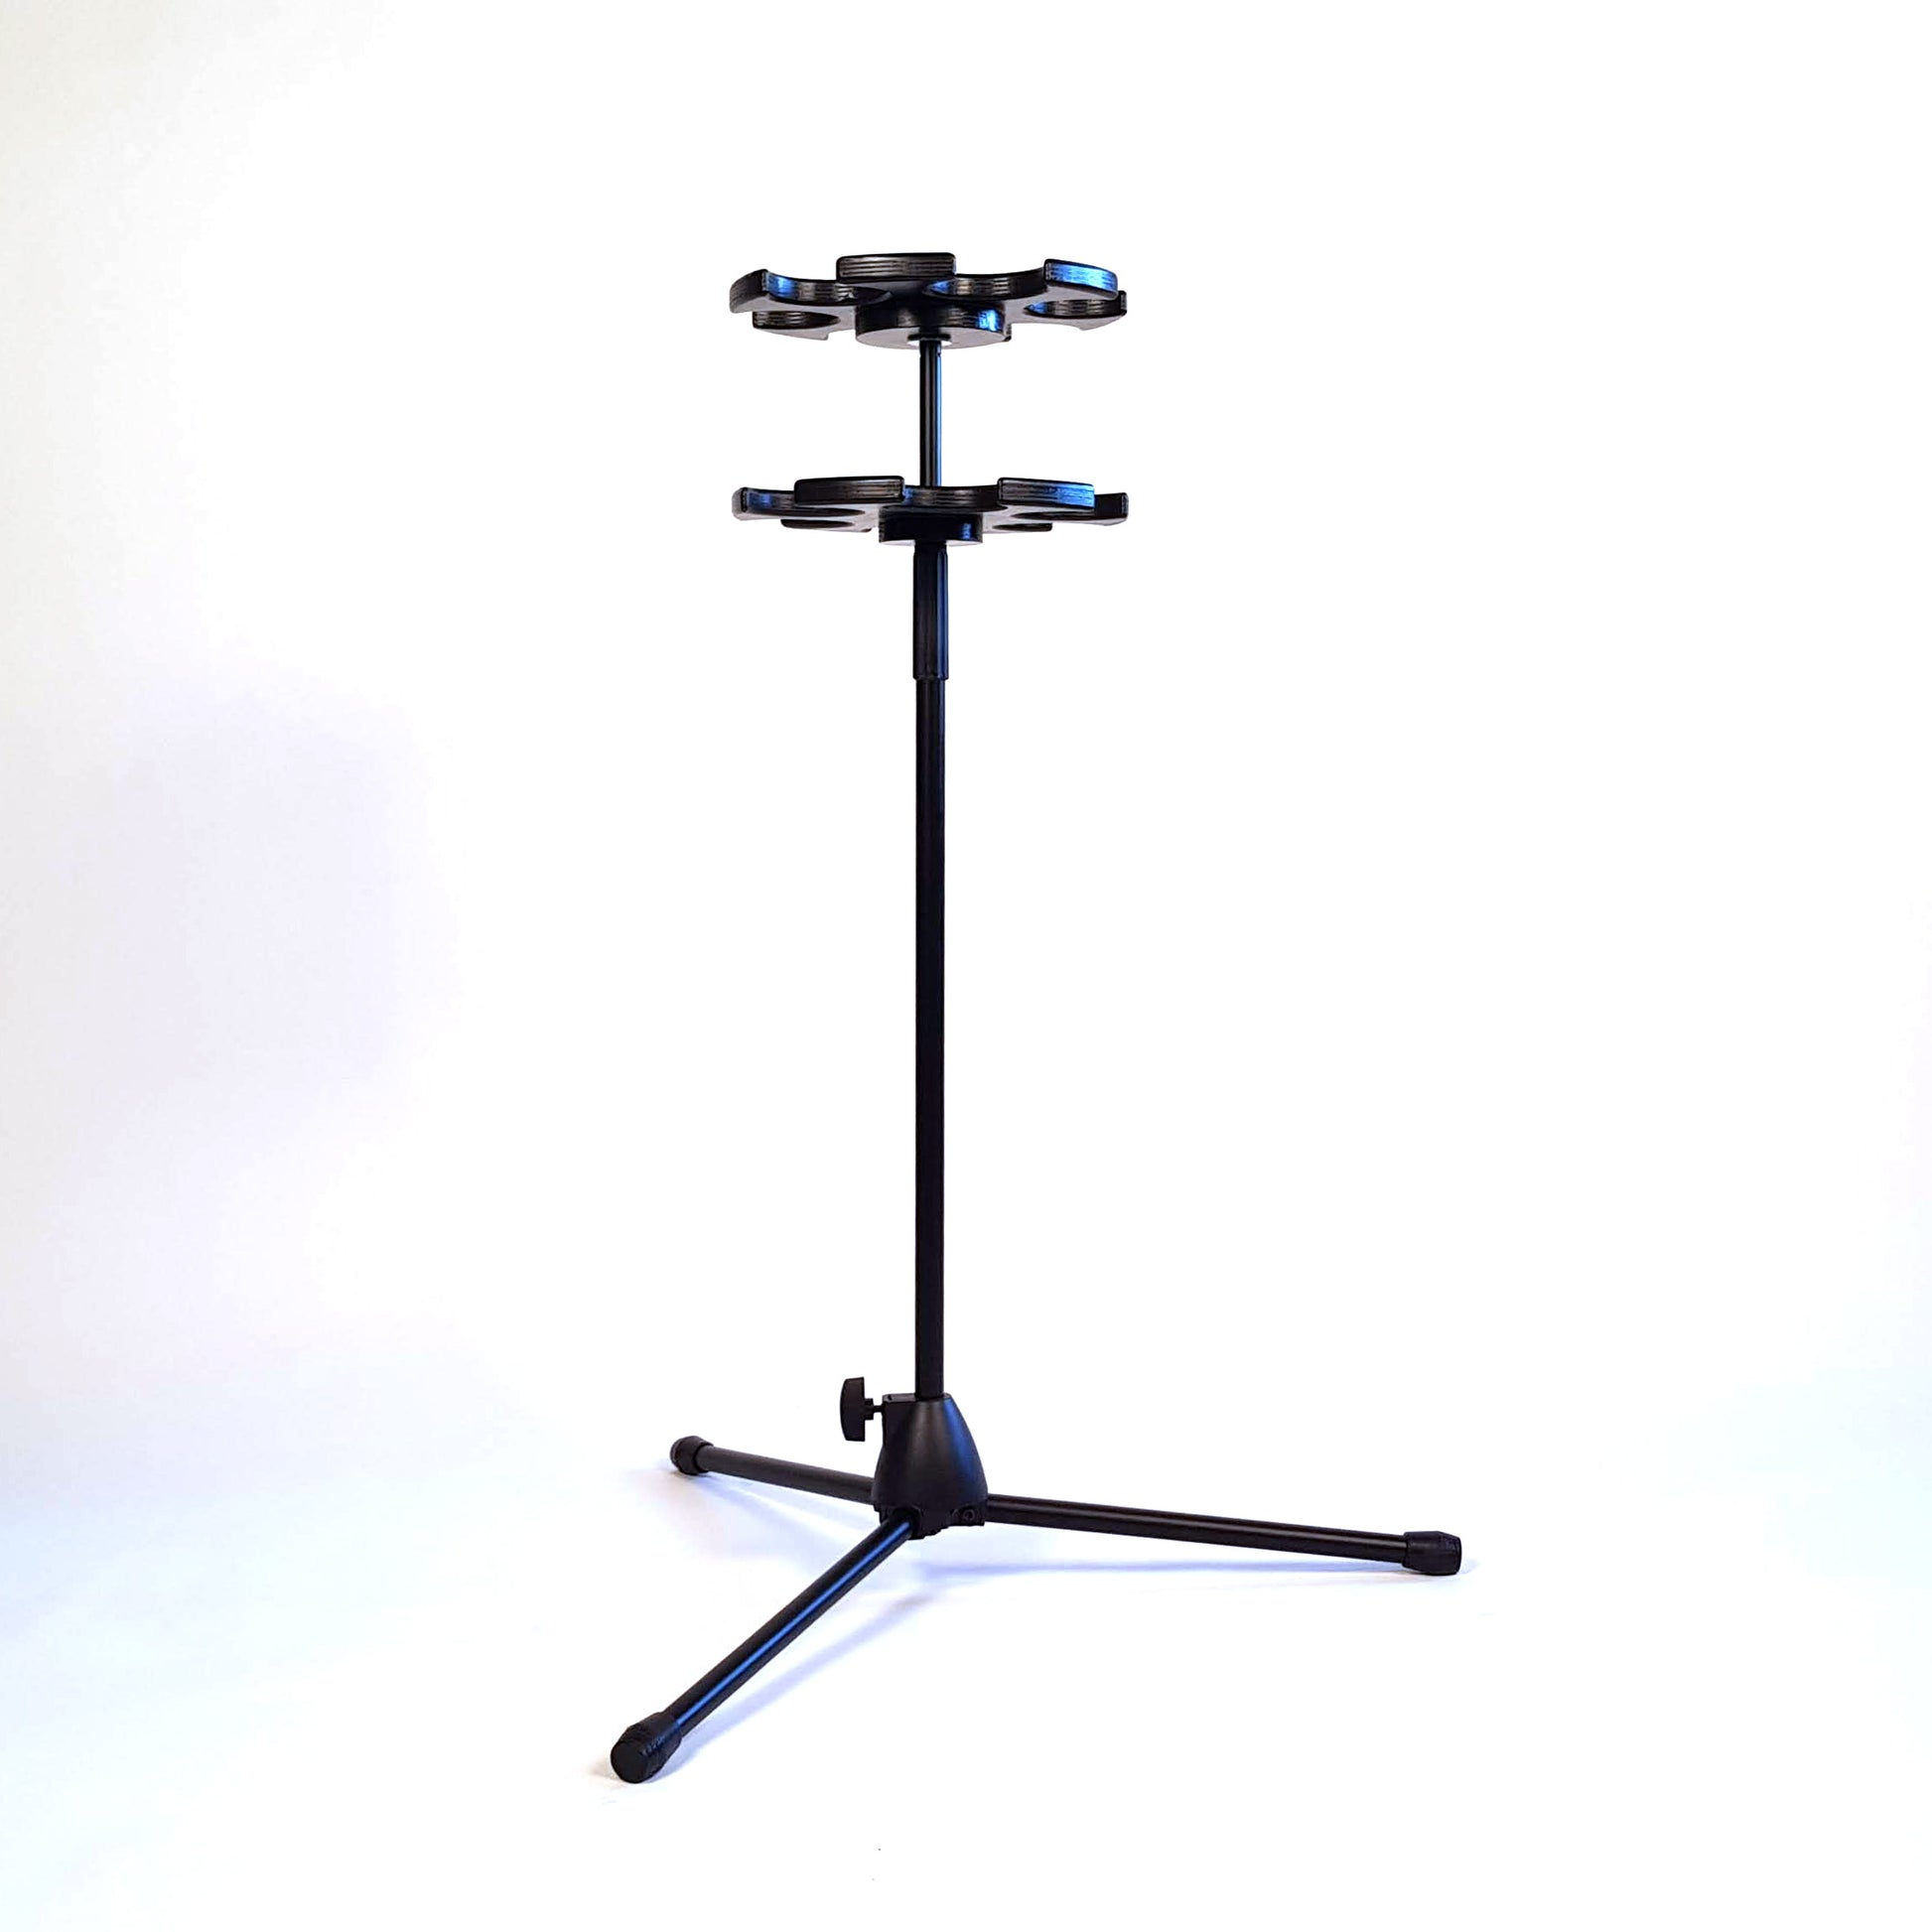 Side view of DEMAND Boccia Ball Stand at lowest height setting